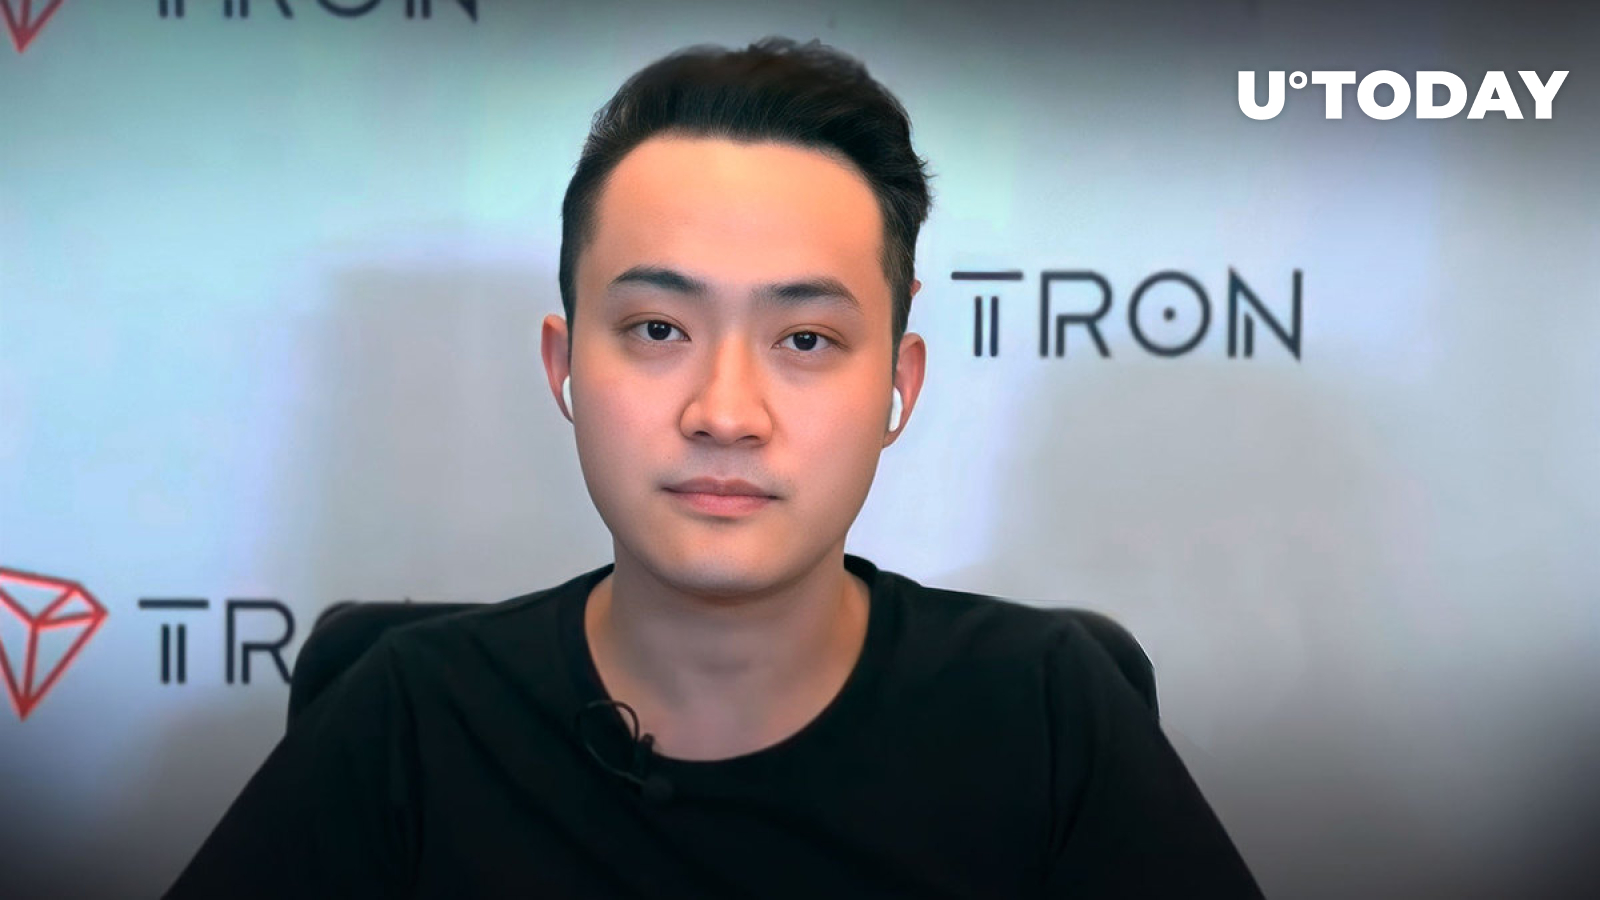 Tron Founder Justin Sun Explains Why Tesla Selling Bitcoin Is Great News